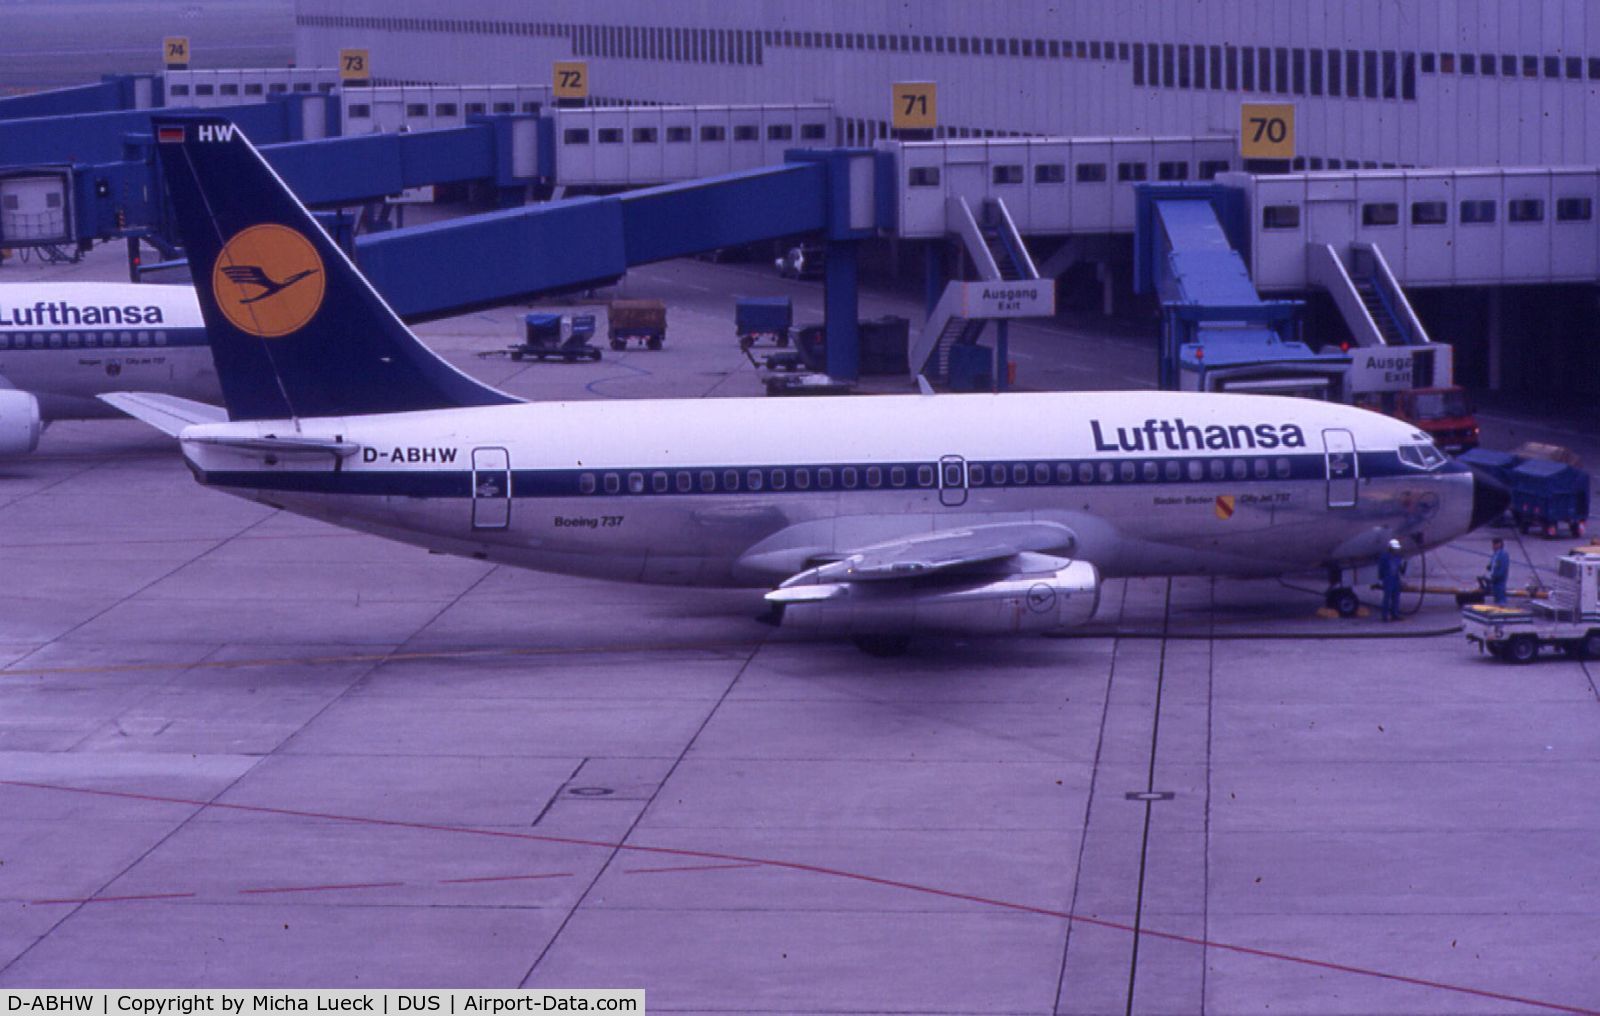 D-ABHW, 1982 Boeing 737-230 C/N 22634, LH's old livery in June 1988